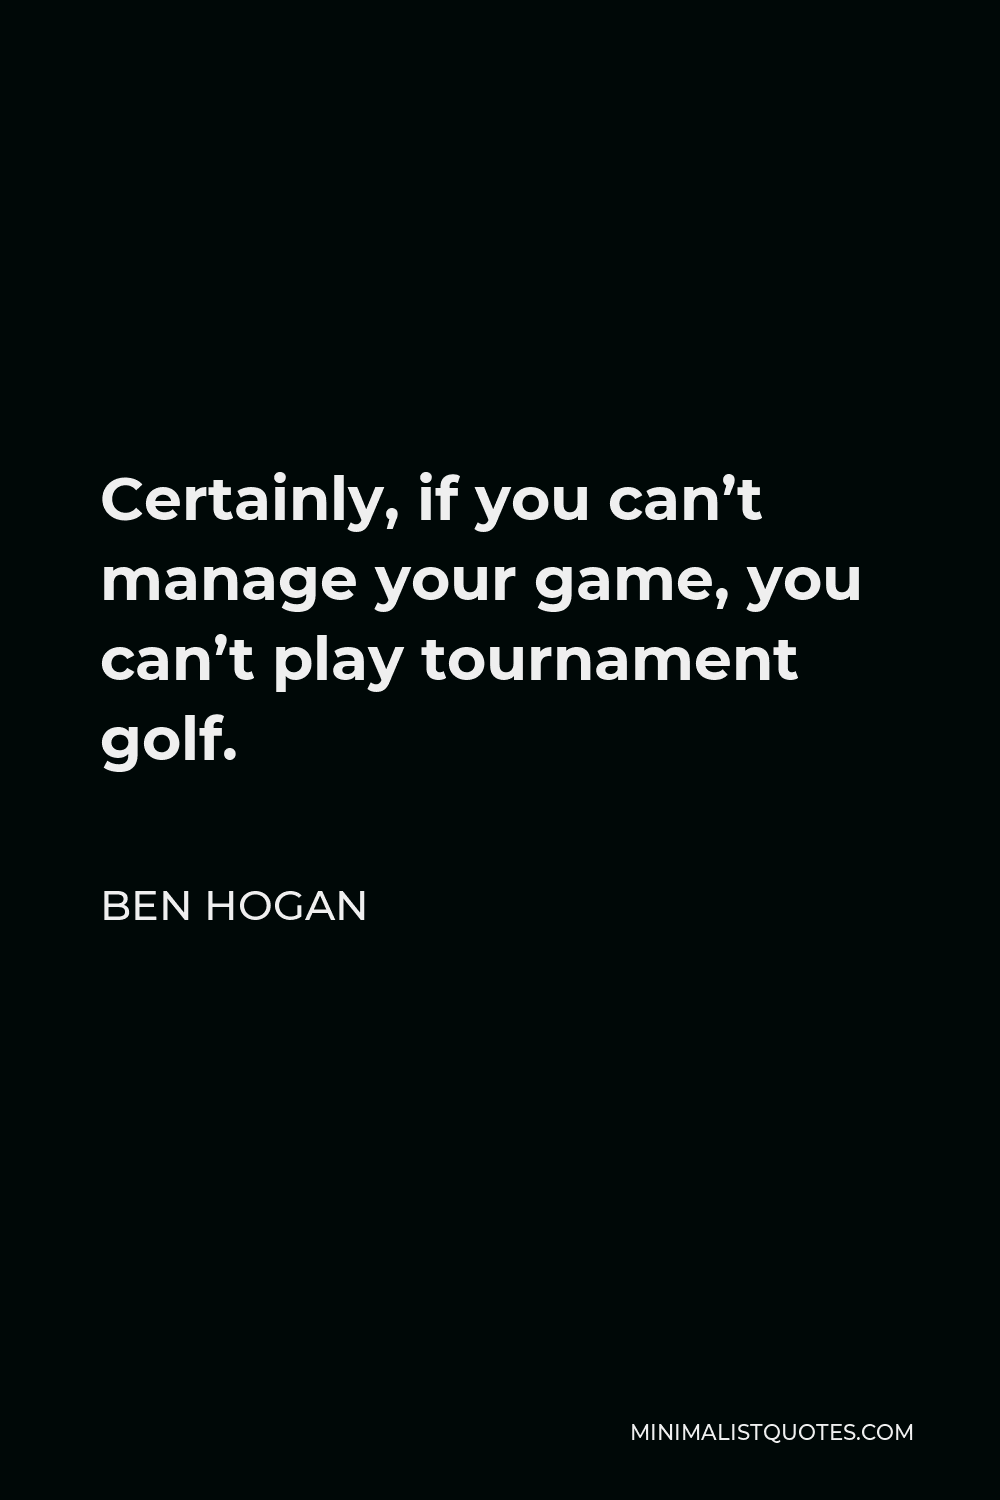 Ben Hogan Quote - Certainly, if you can’t manage your game, you can’t play tournament golf.